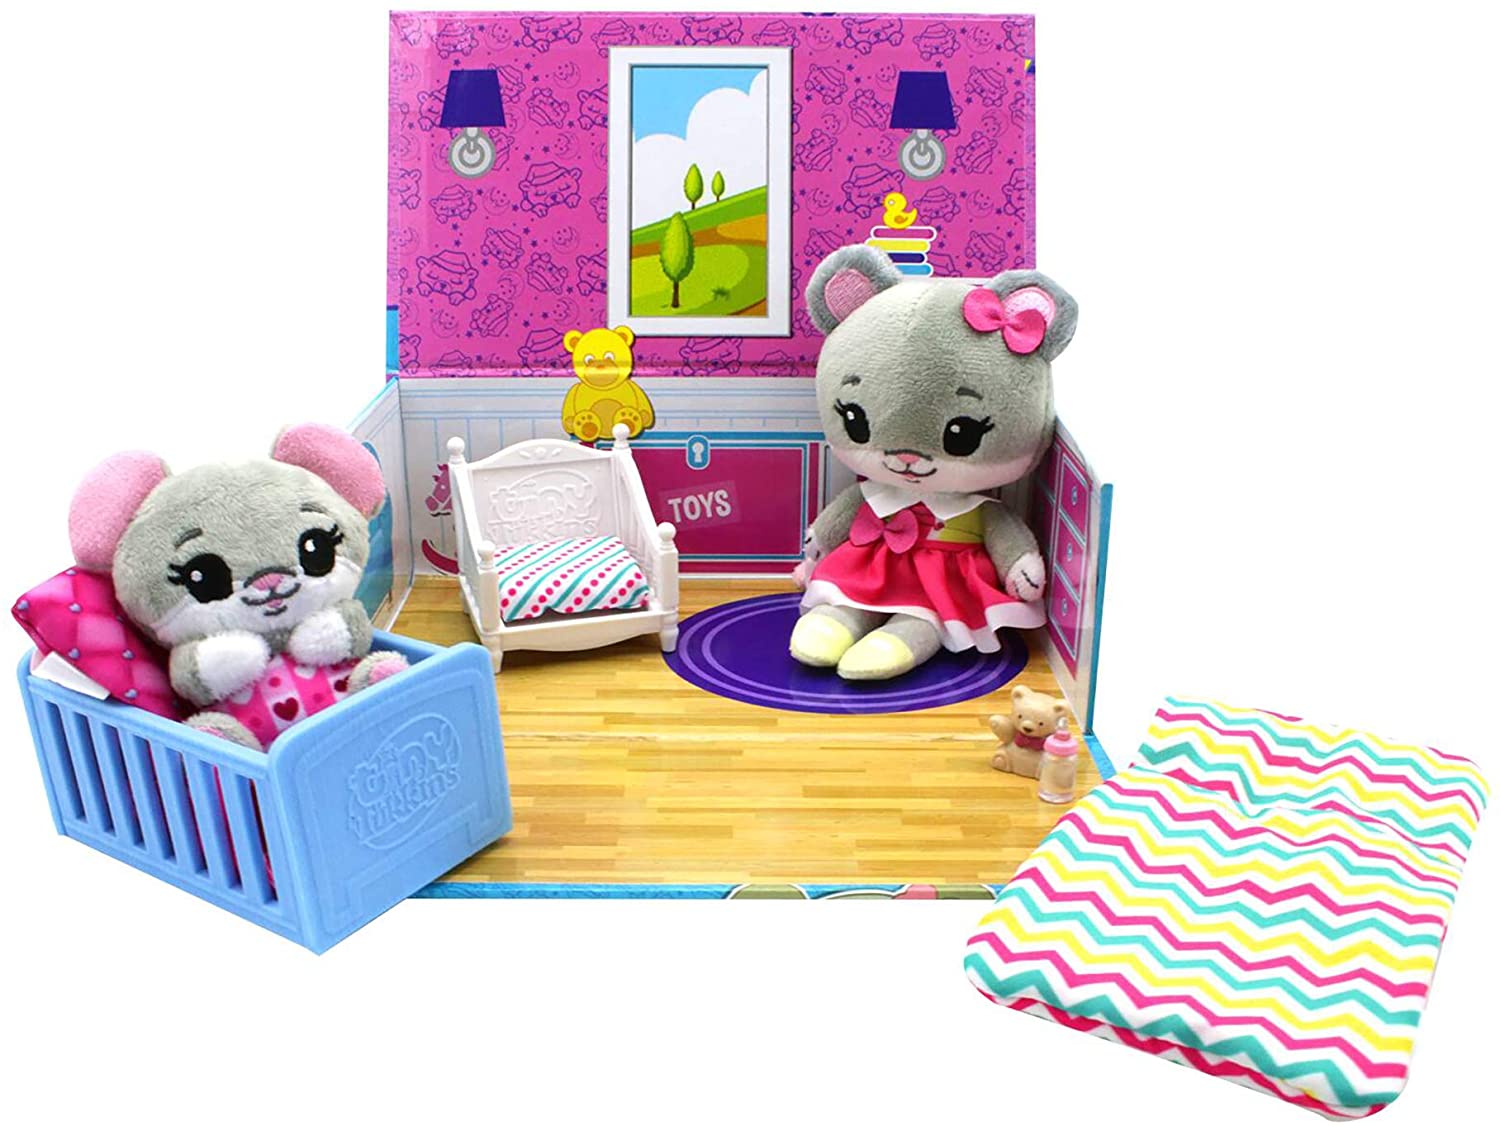 Tiny Tukkins Mouse Playsets w/ Plush Characters & Accessories $4.33 + Free Shipping w/ Prime or Free S/H on $25+